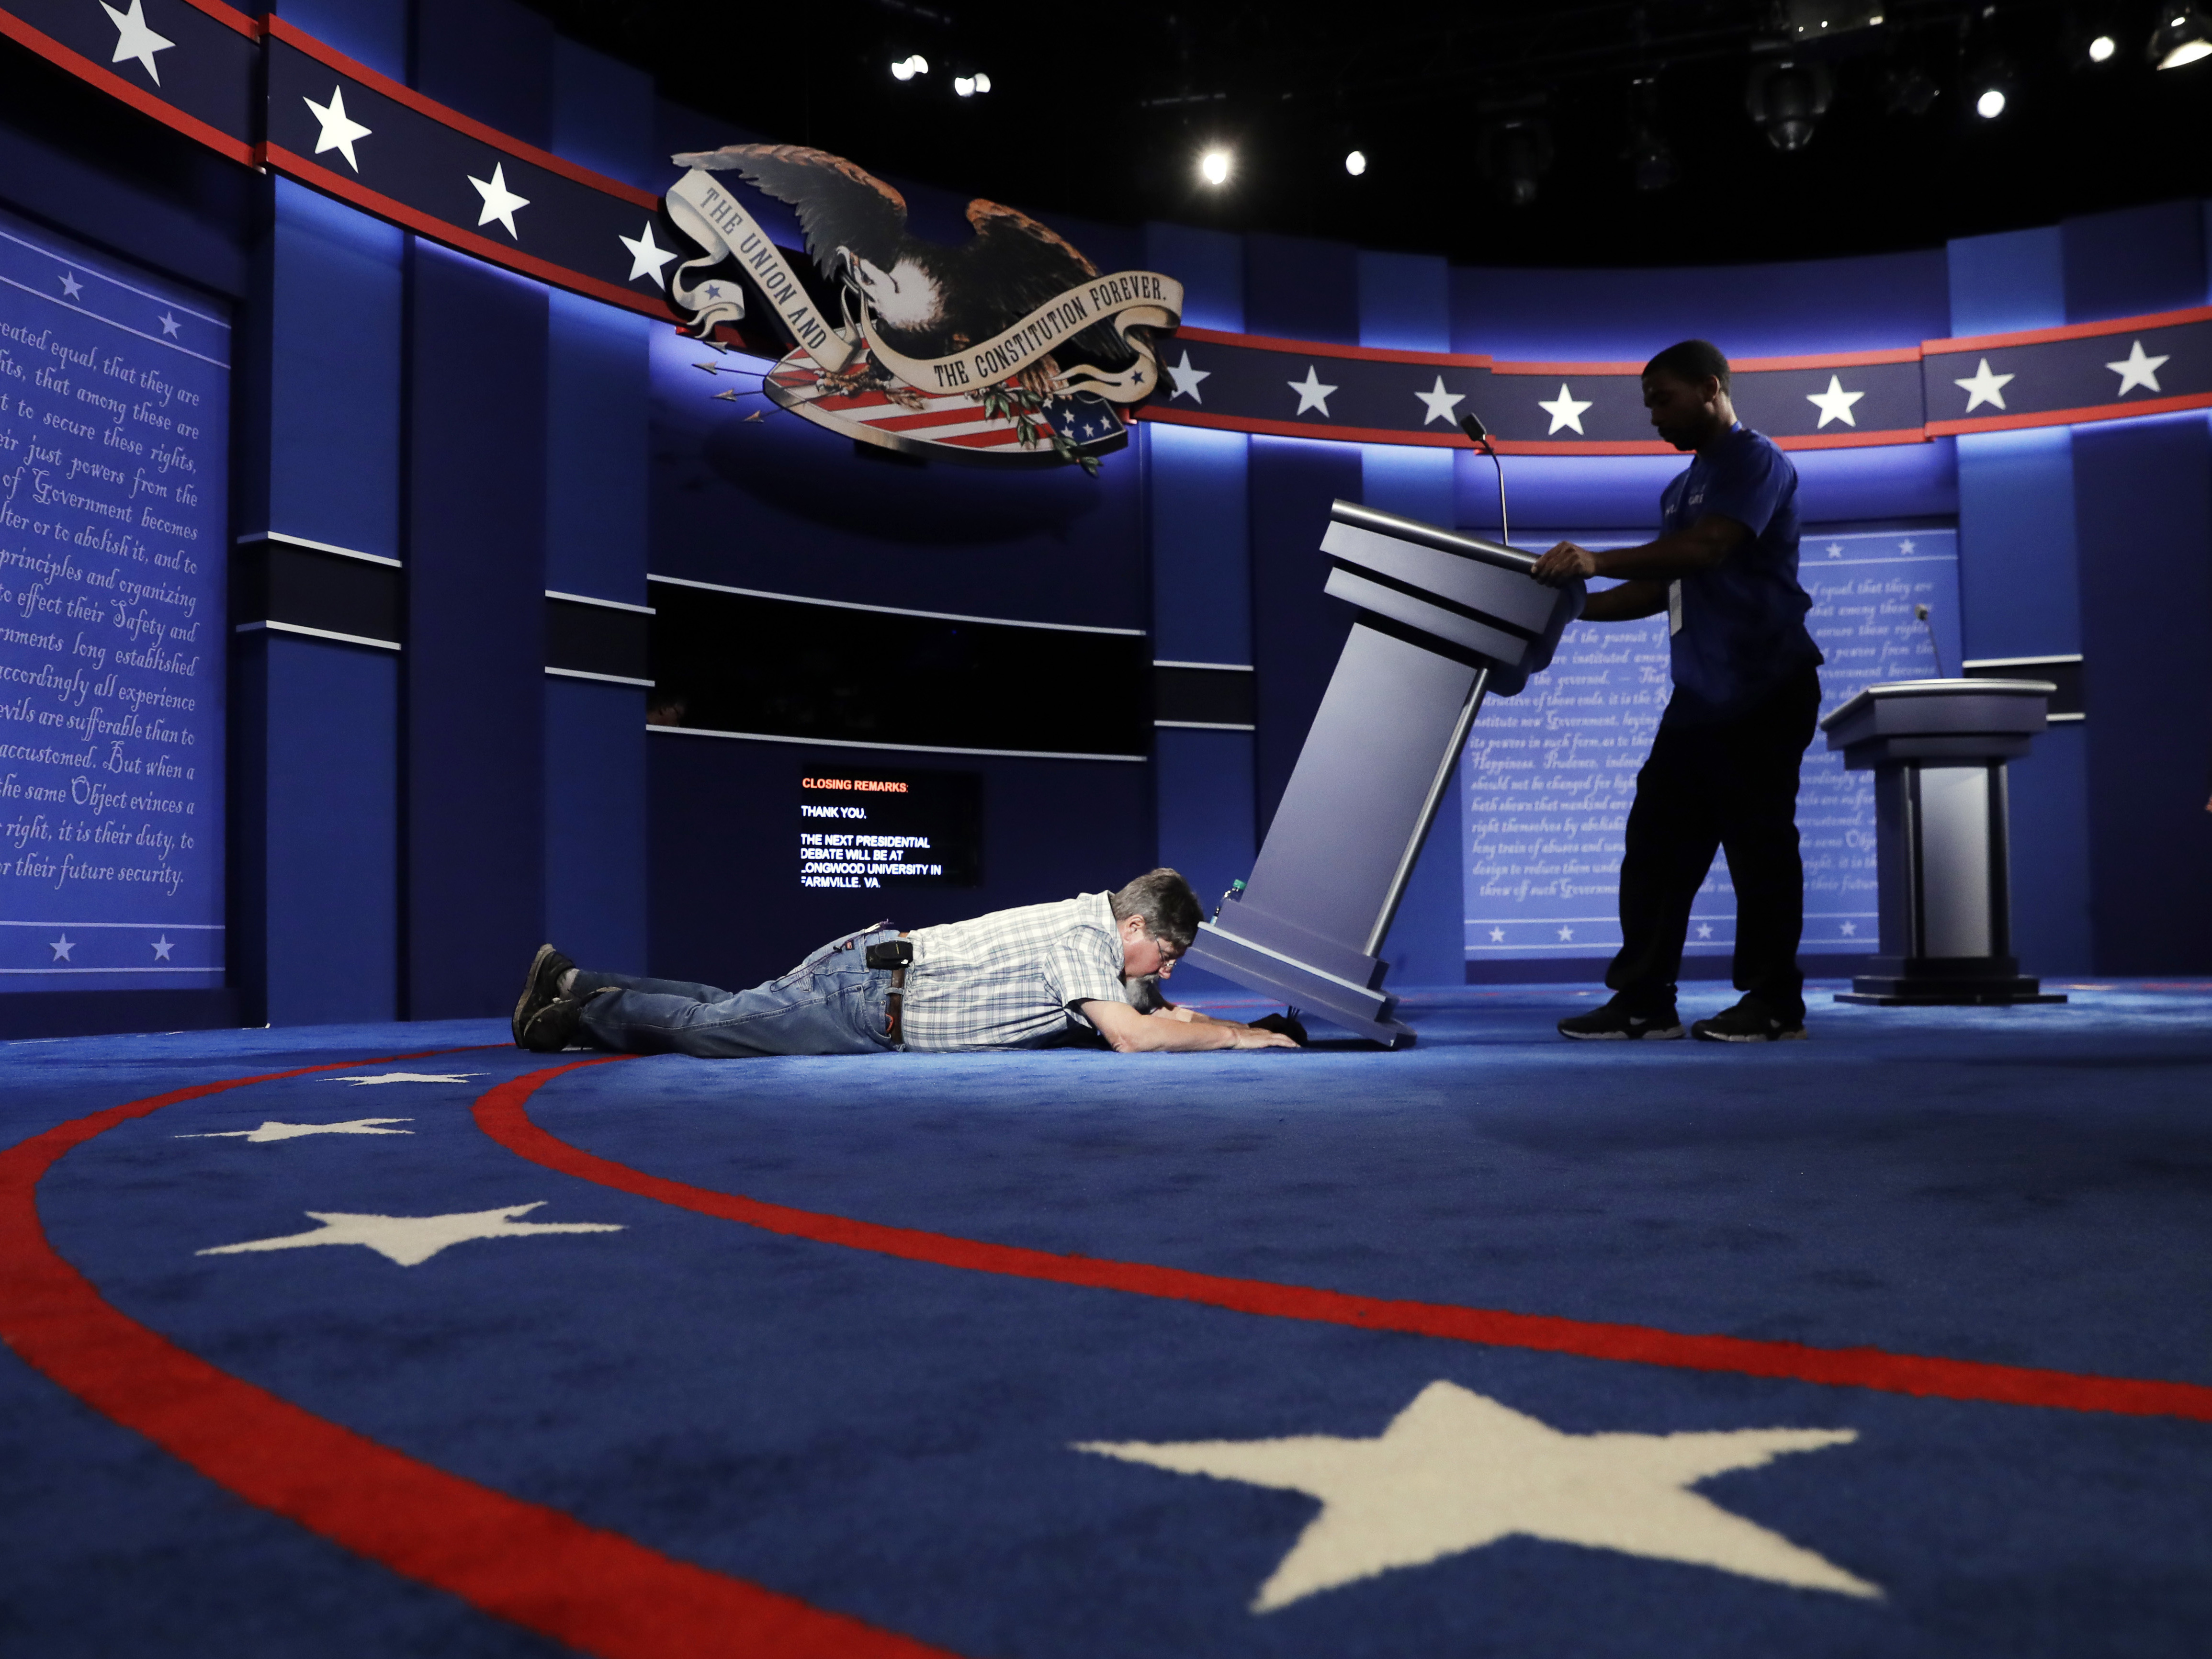 Technicians set up the stage for the Sept. 26 debate between Democratic presidential candidate Hillary Clinton and Republican presidential candidate Donald Trump at Hofstra University in Hempstead, N.Y.